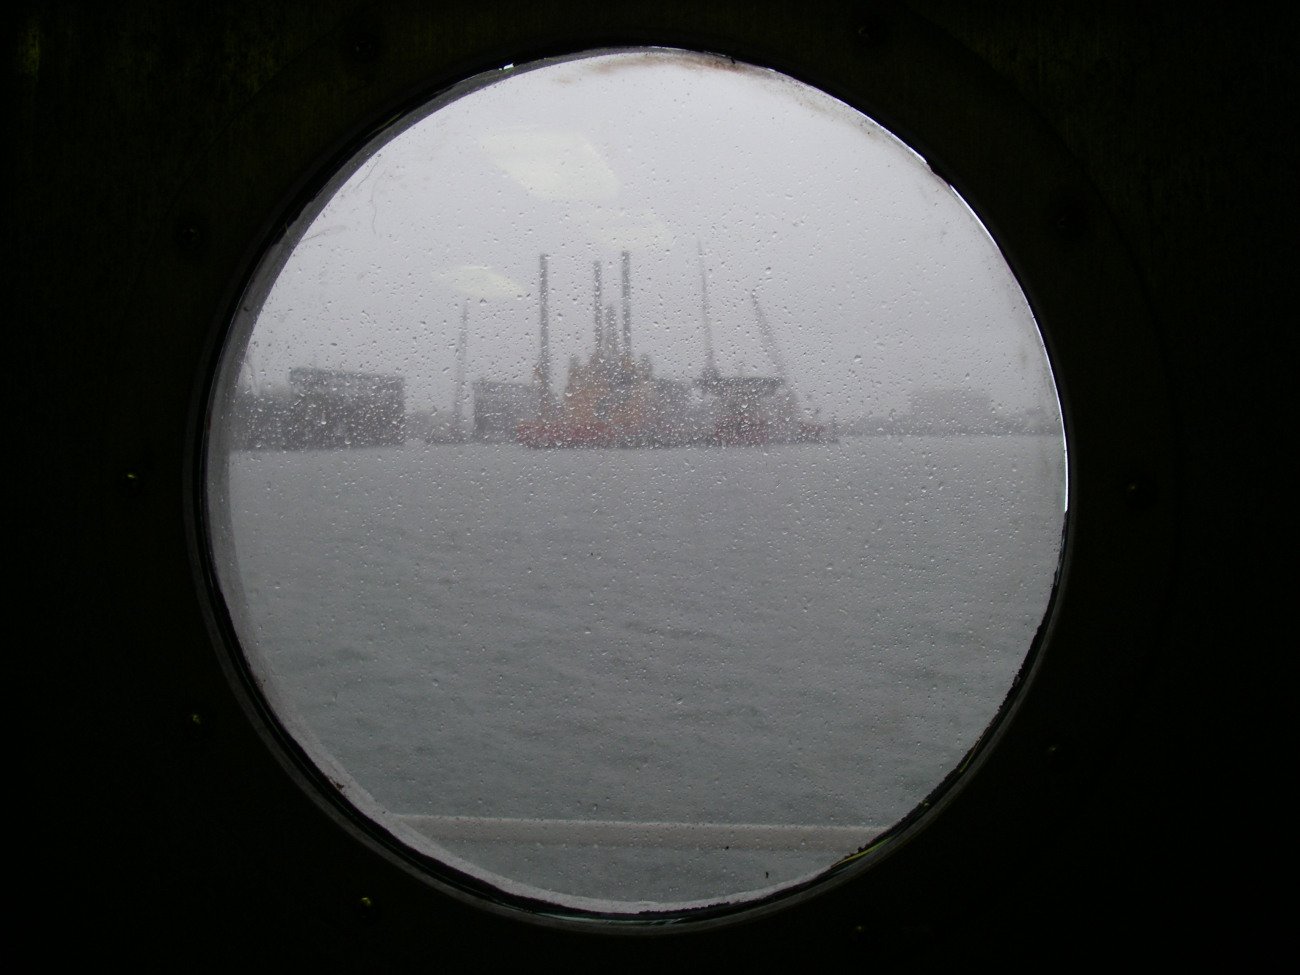 Looking through the porthole on a rainy day at jackup rigs in Galveston harbor